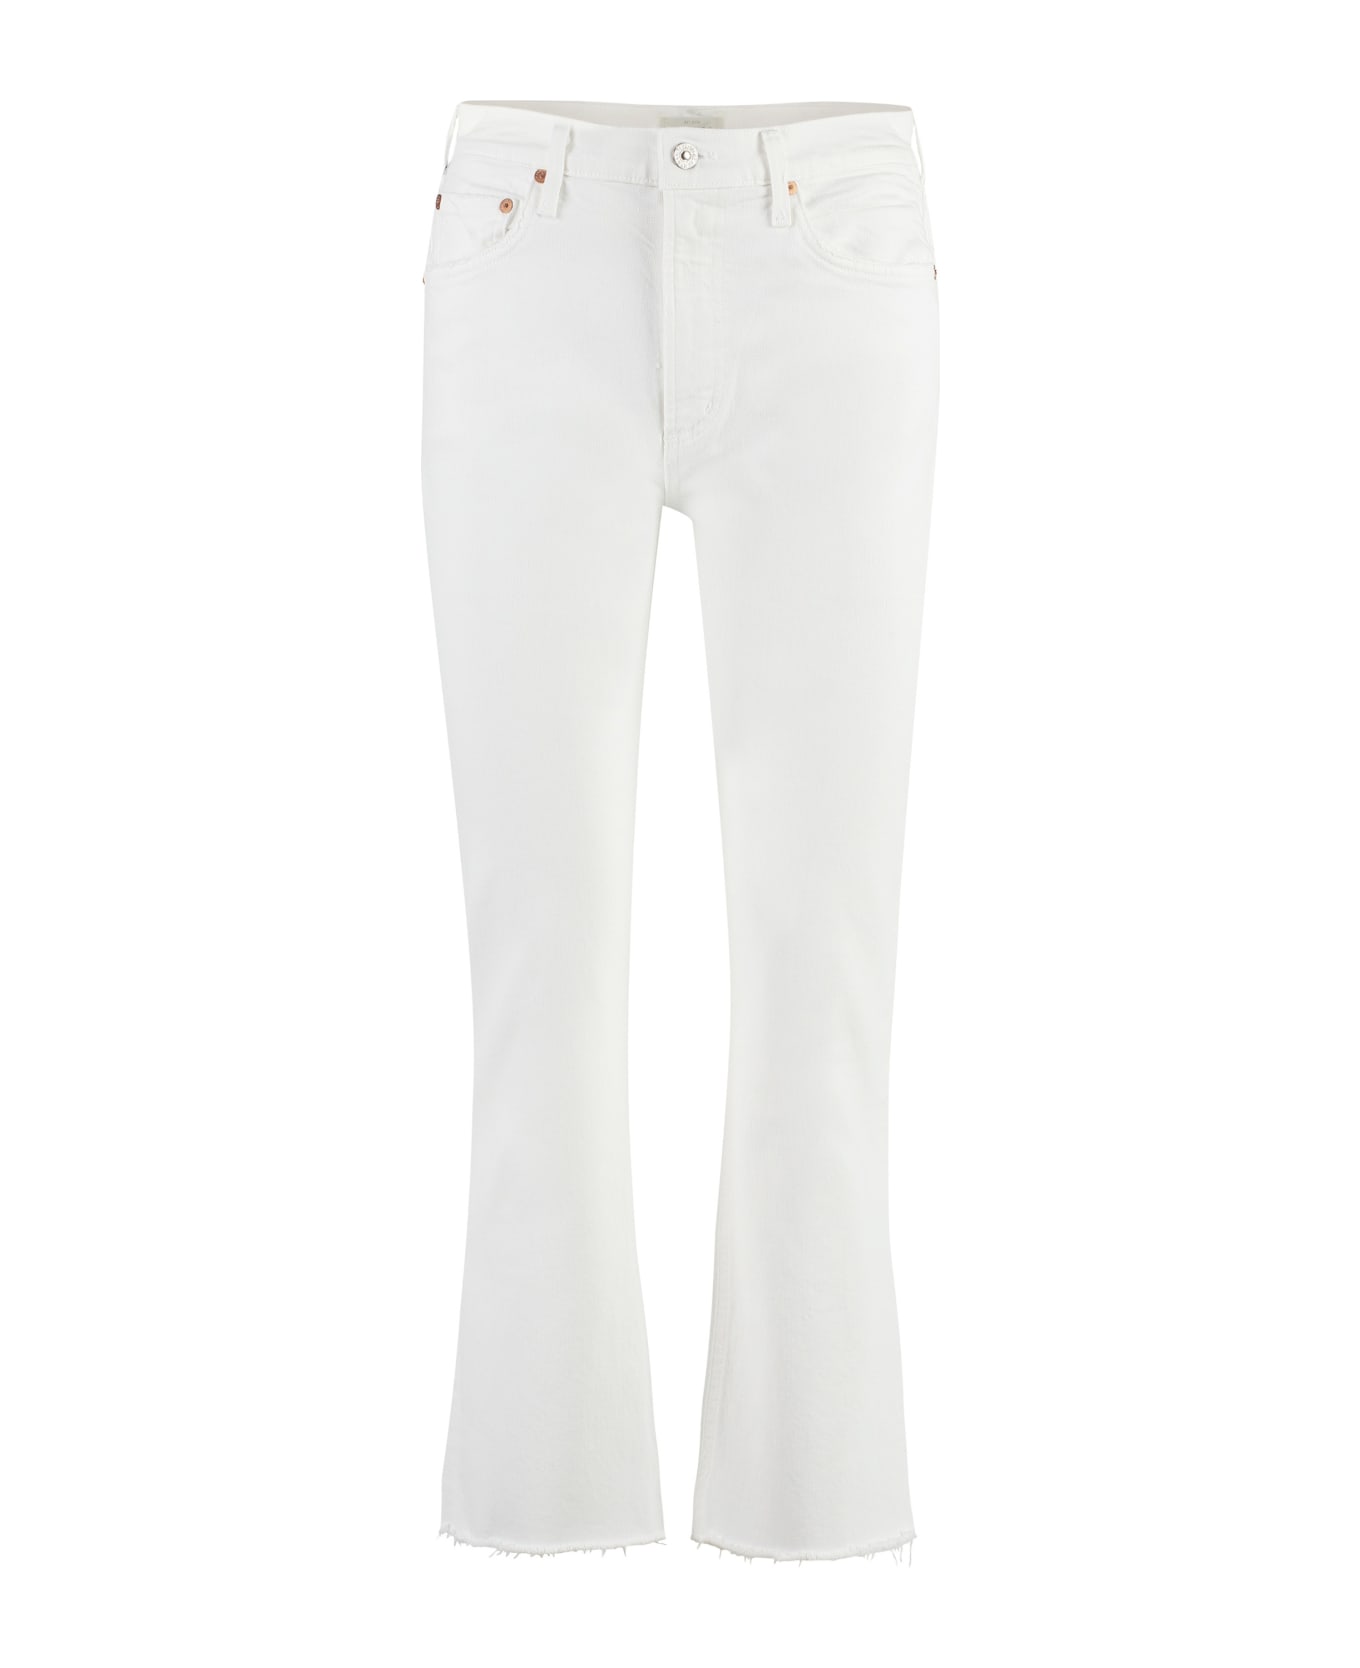 Citizens of Humanity Isola Jeans - MAYFAIR WHITE デニム